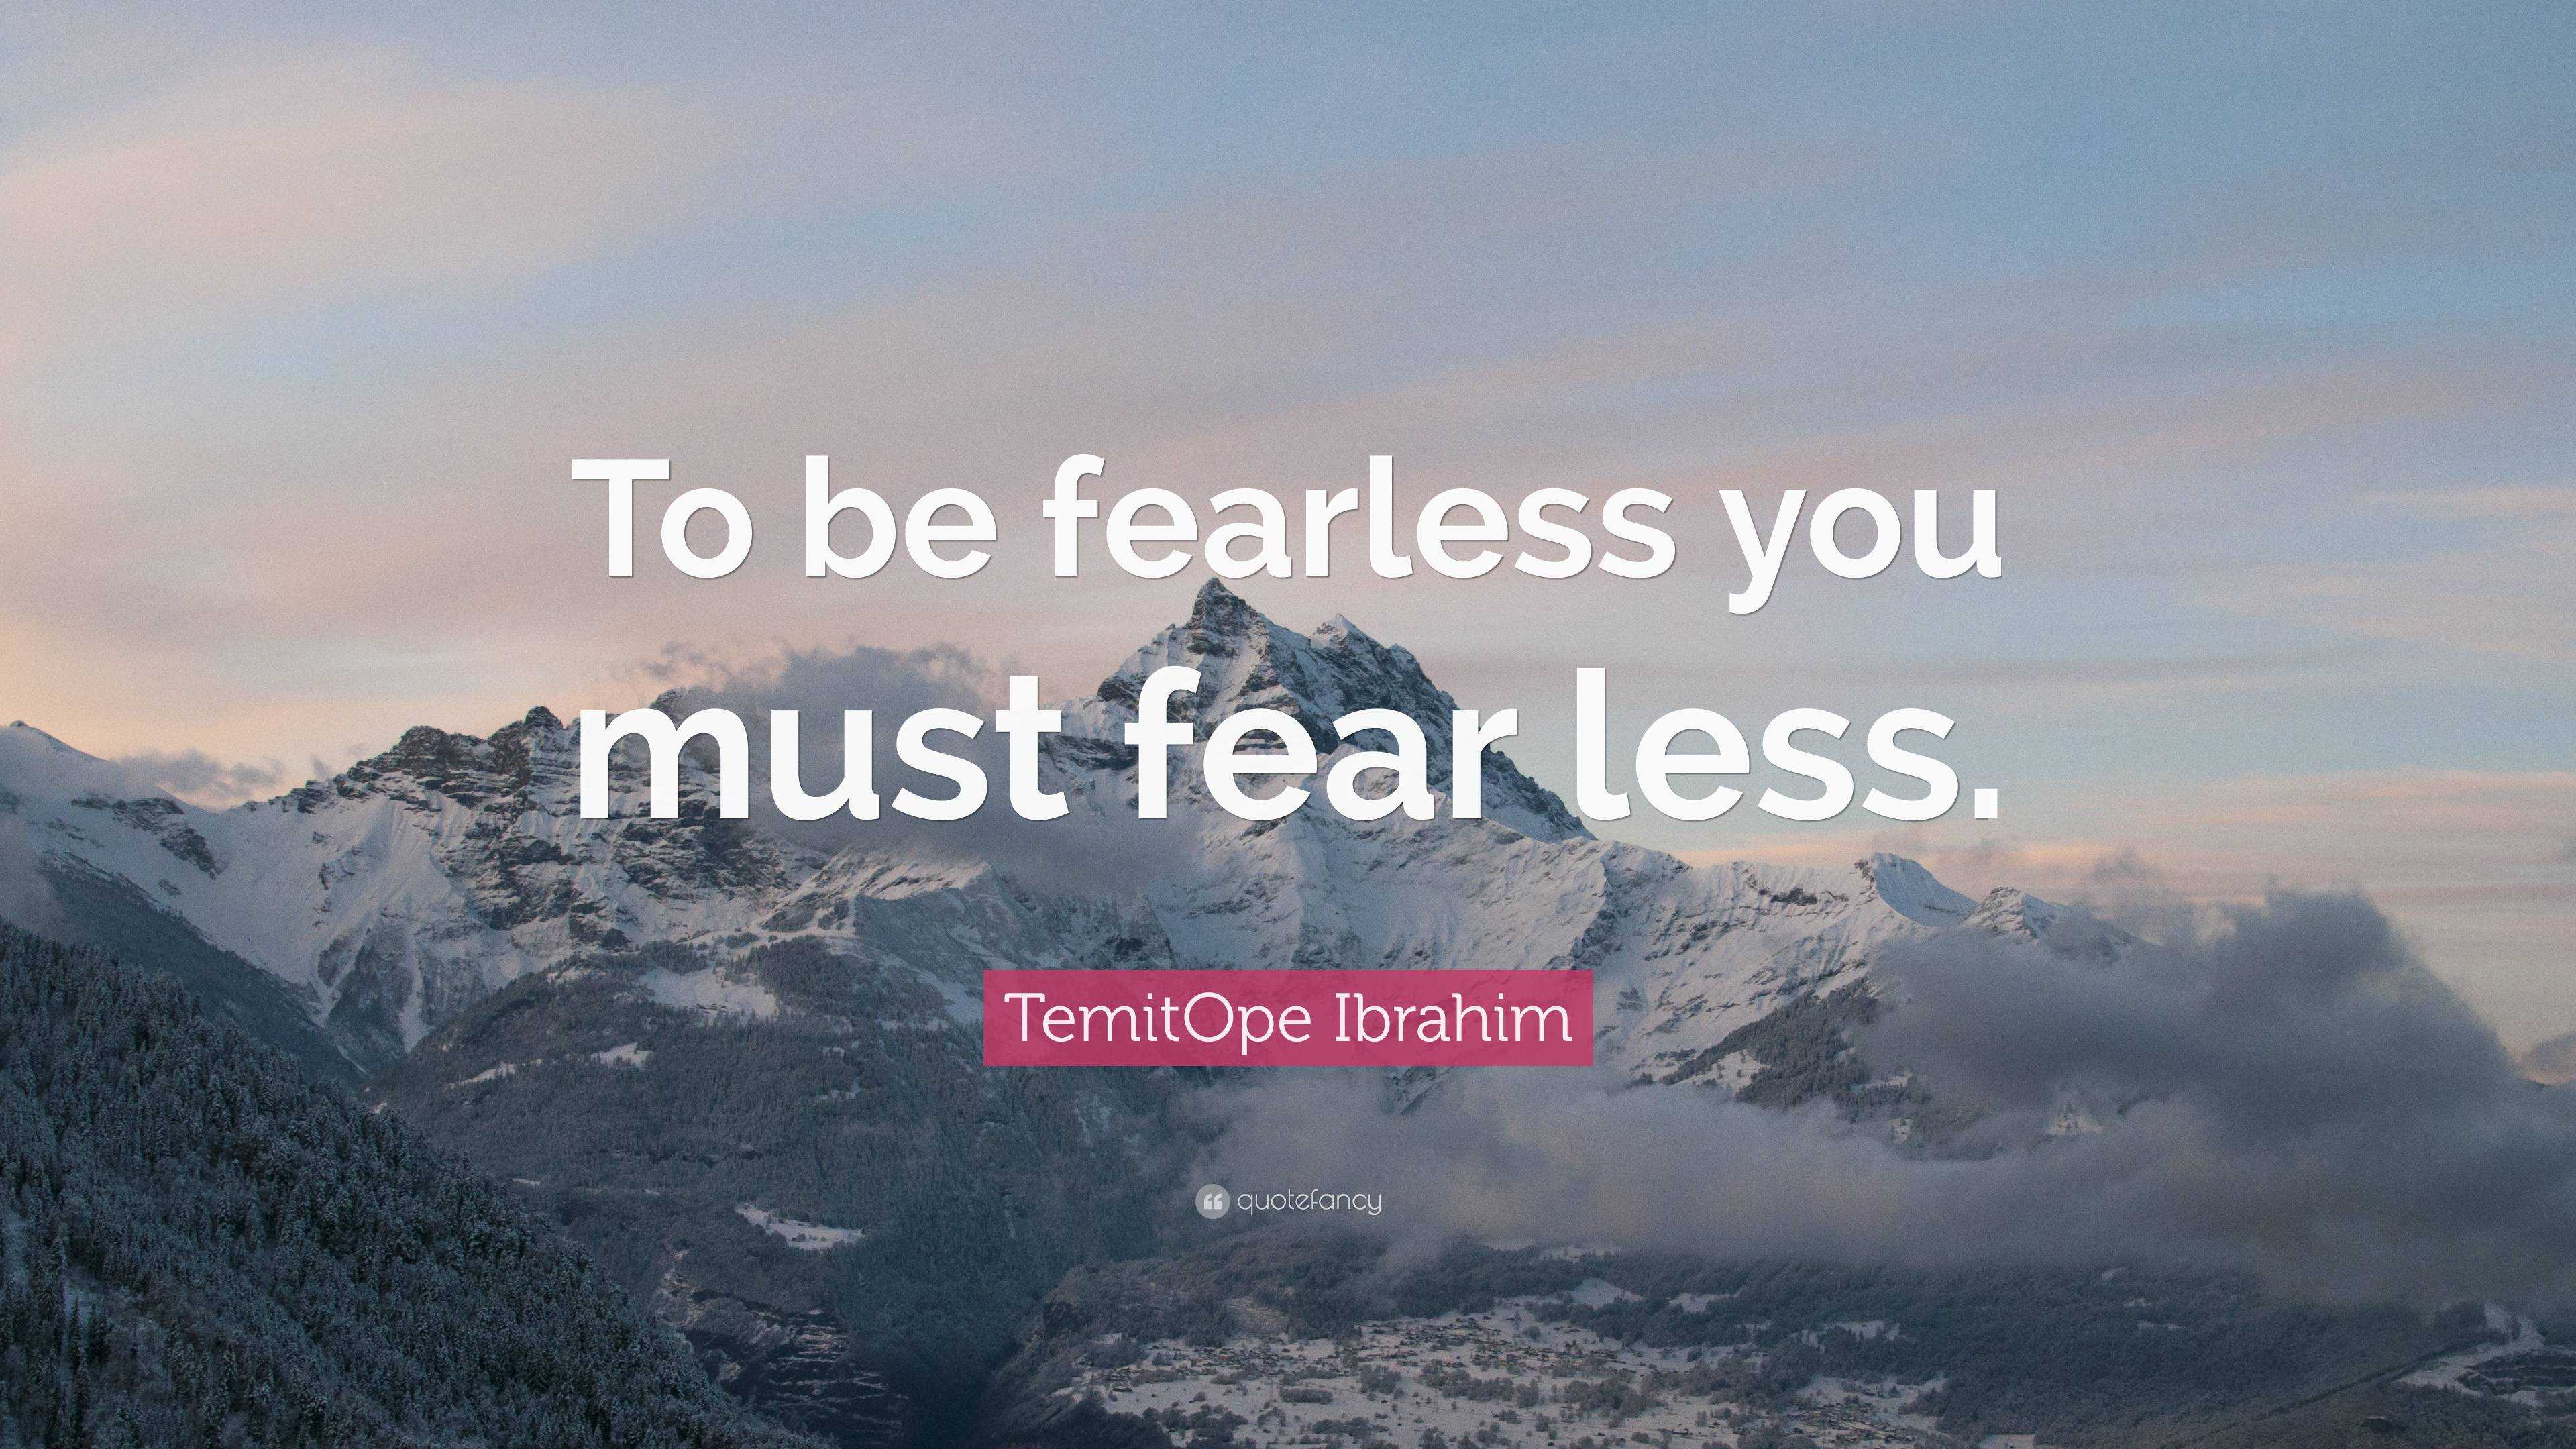 https://quotefancy.com/media/wallpaper/3840x2160/6927499-TemitOpe-Ibrahim-Quote-To-be-fearless-you-must-fear-less.jpg